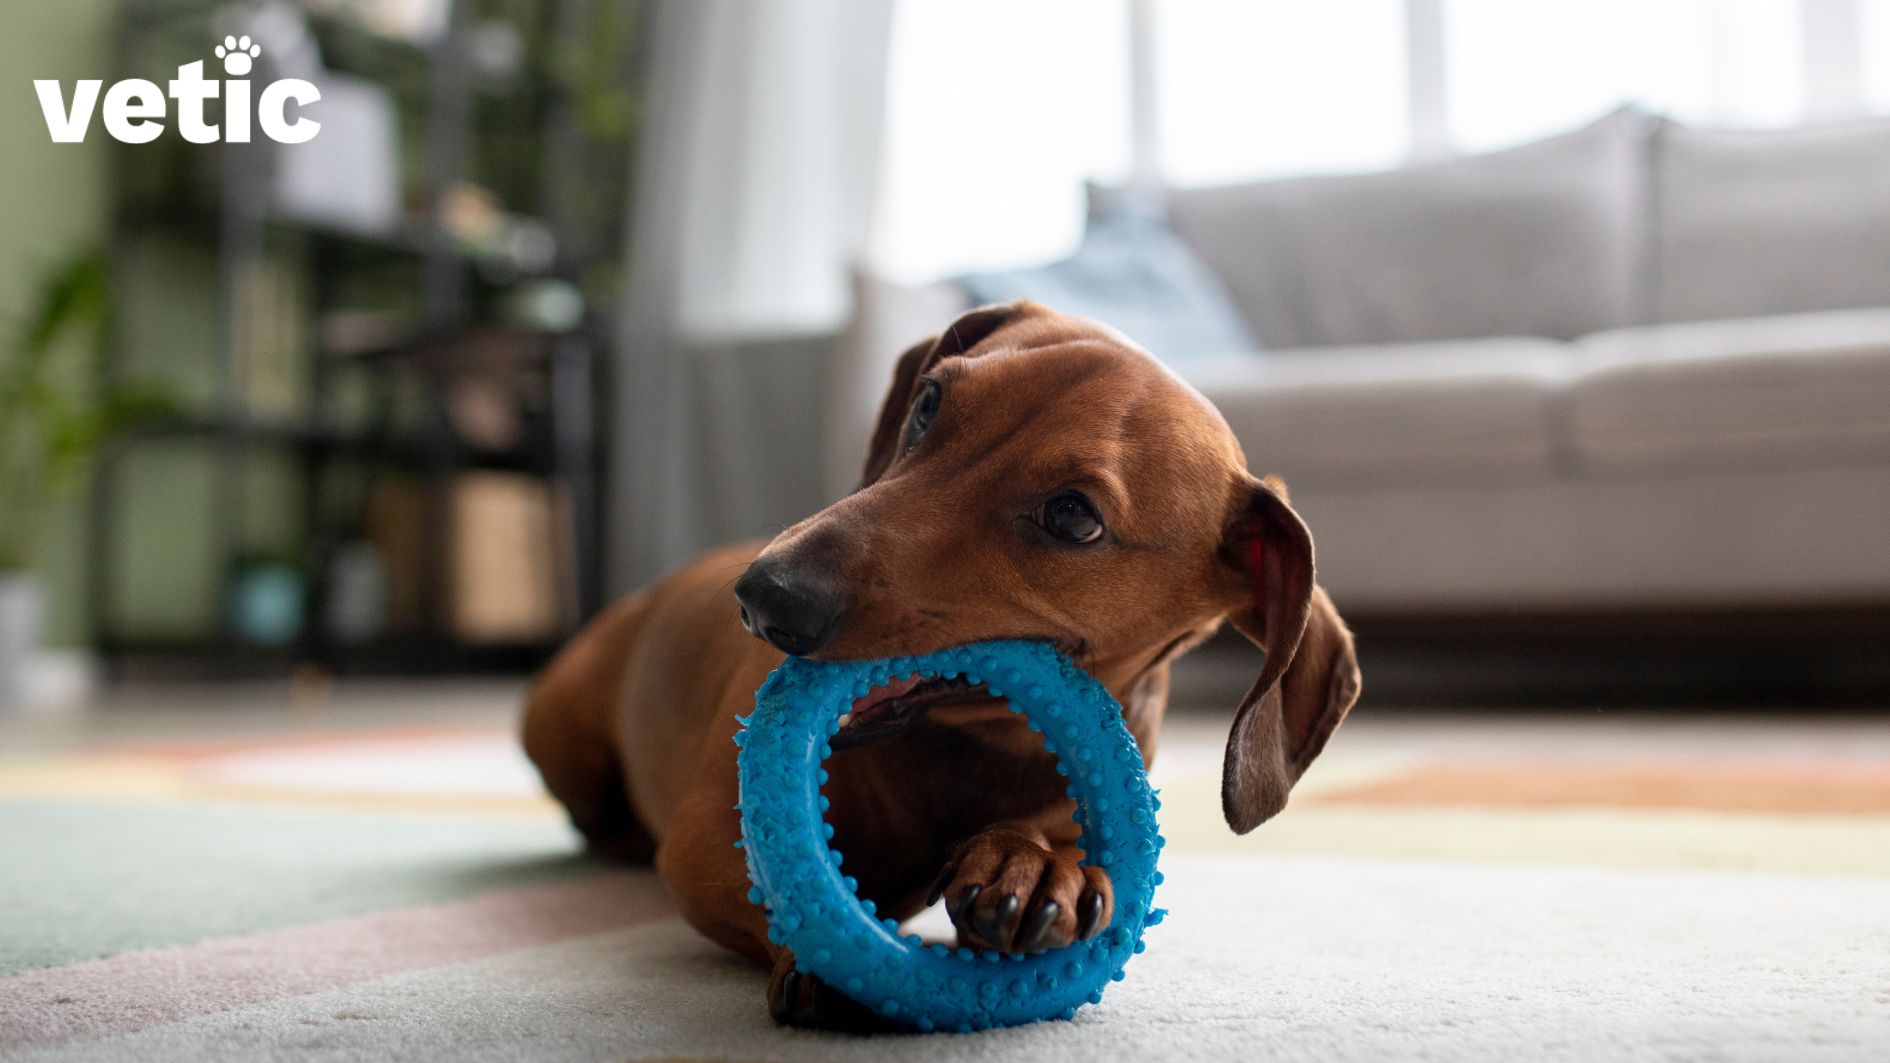 adult Dachshund sitting on the rug and chewing on a blue spiked ring chew toy - an adult dog accessory